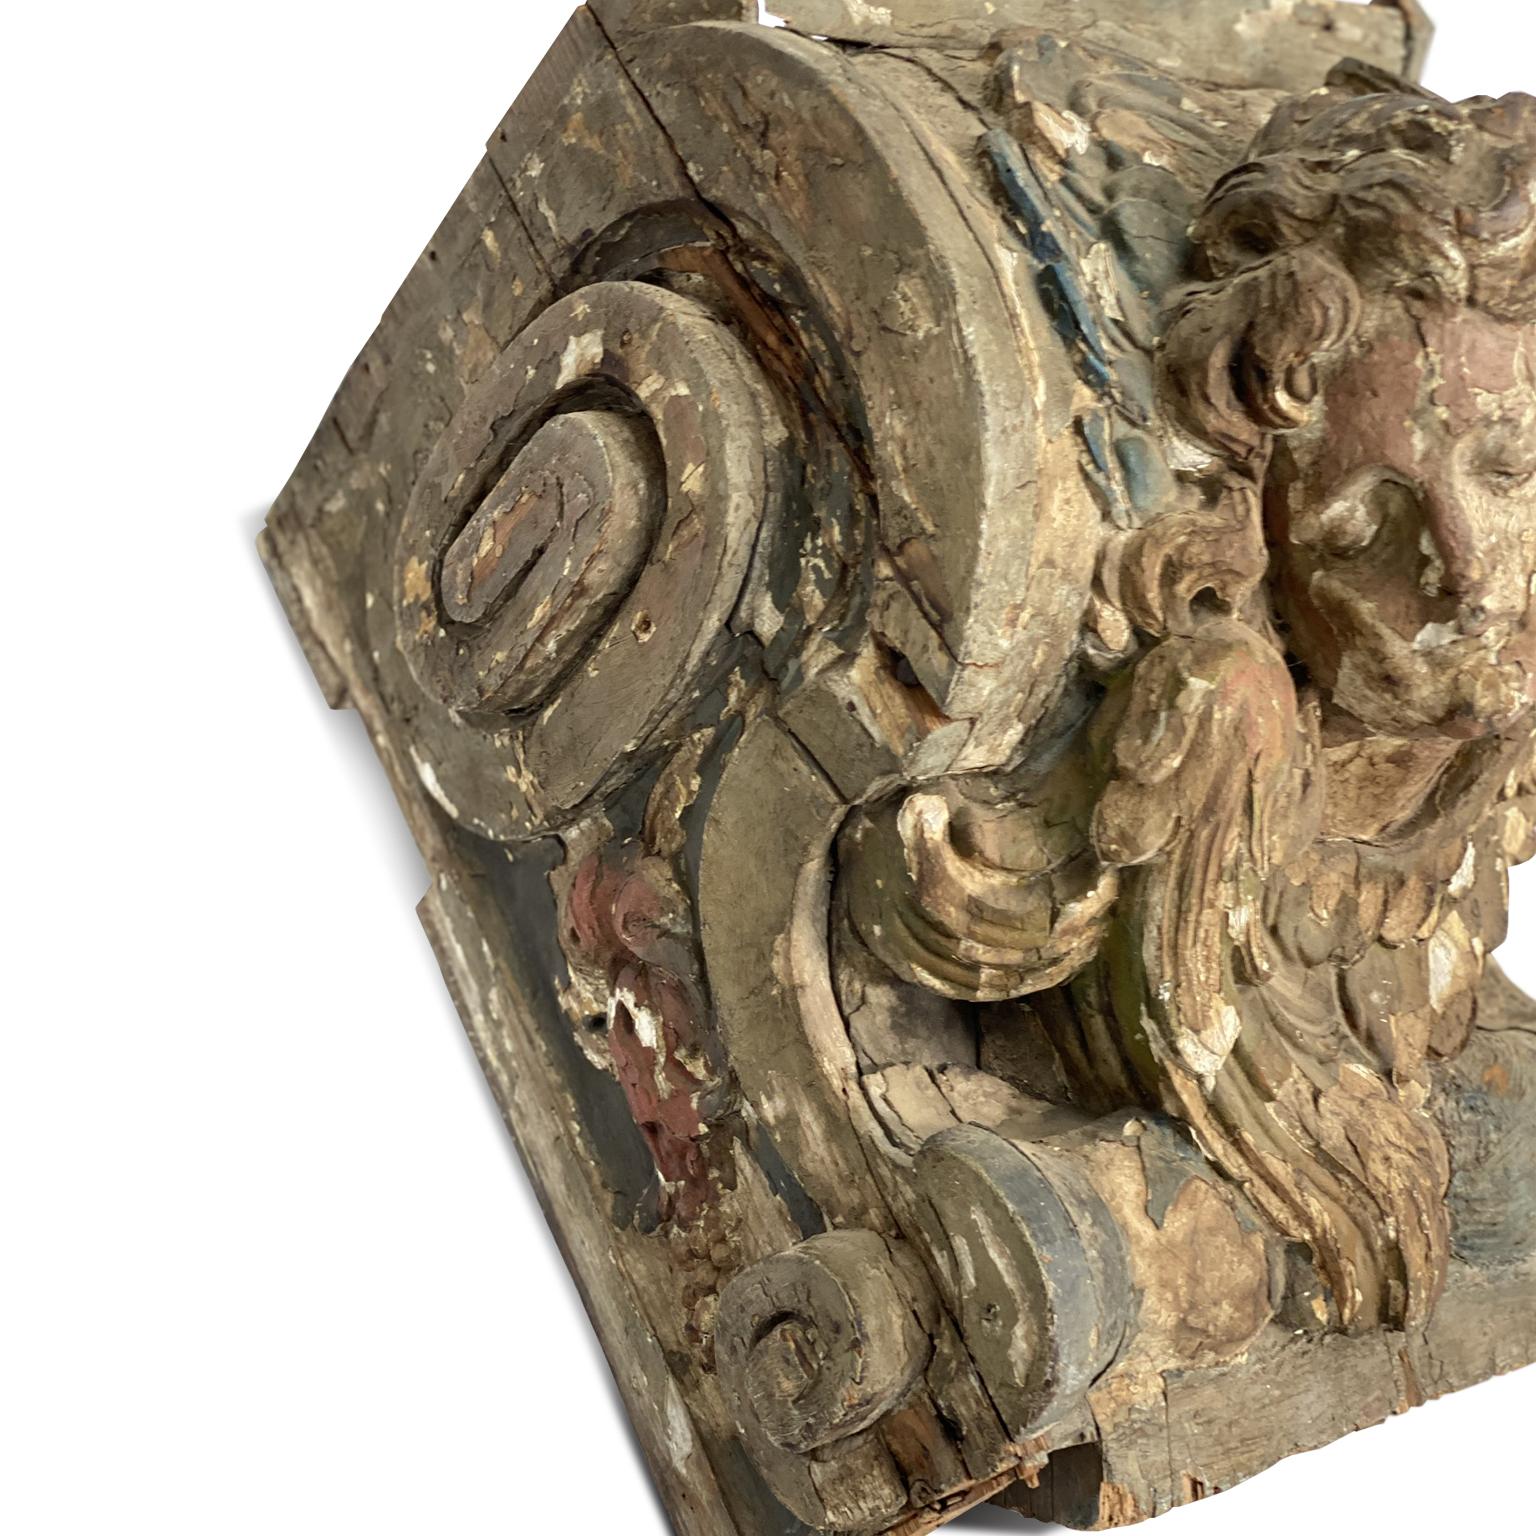 Magnificent 18th century French angel from top of a column. From a cathedral in Provence. The expression on the angels face is so moving. The colors are rich and deep with salmon and deep French blues. This piece would be stunning on top of a door,